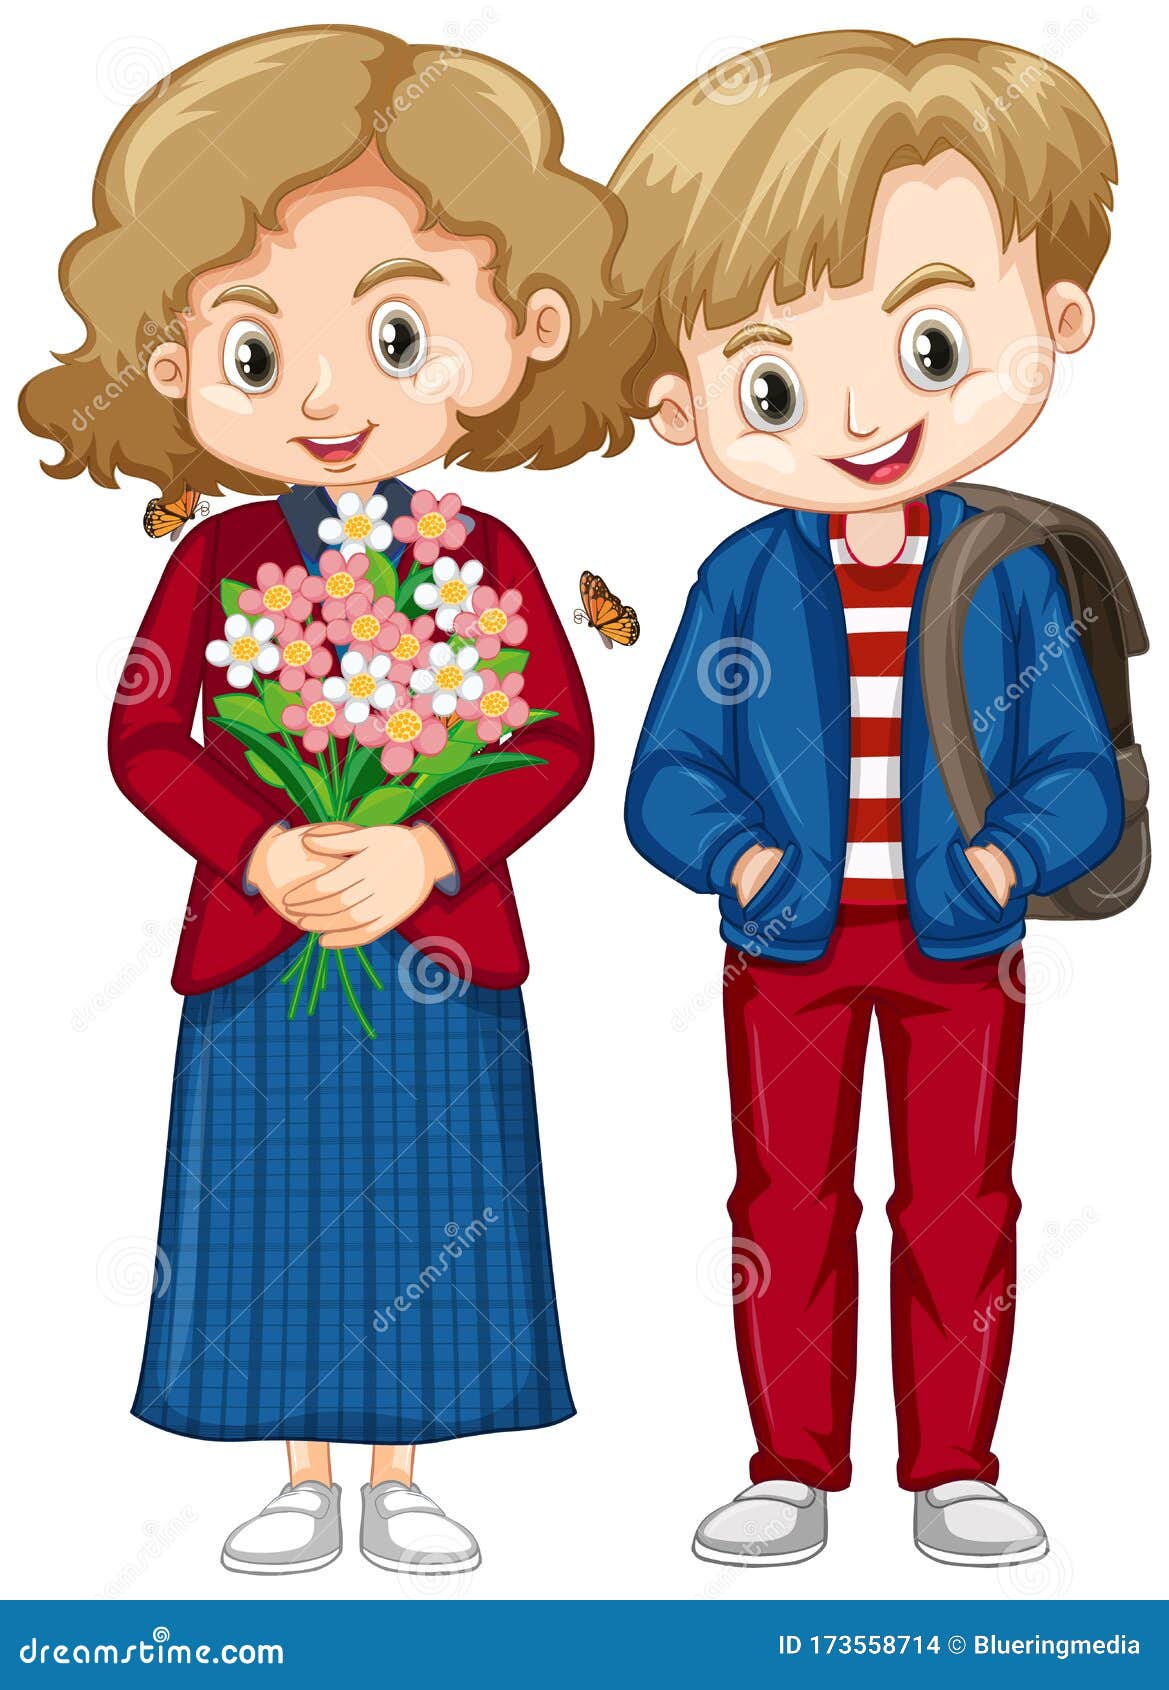 Cute Boy and Girl in Blue and Red Clothes Stock Vector - Illustration ...